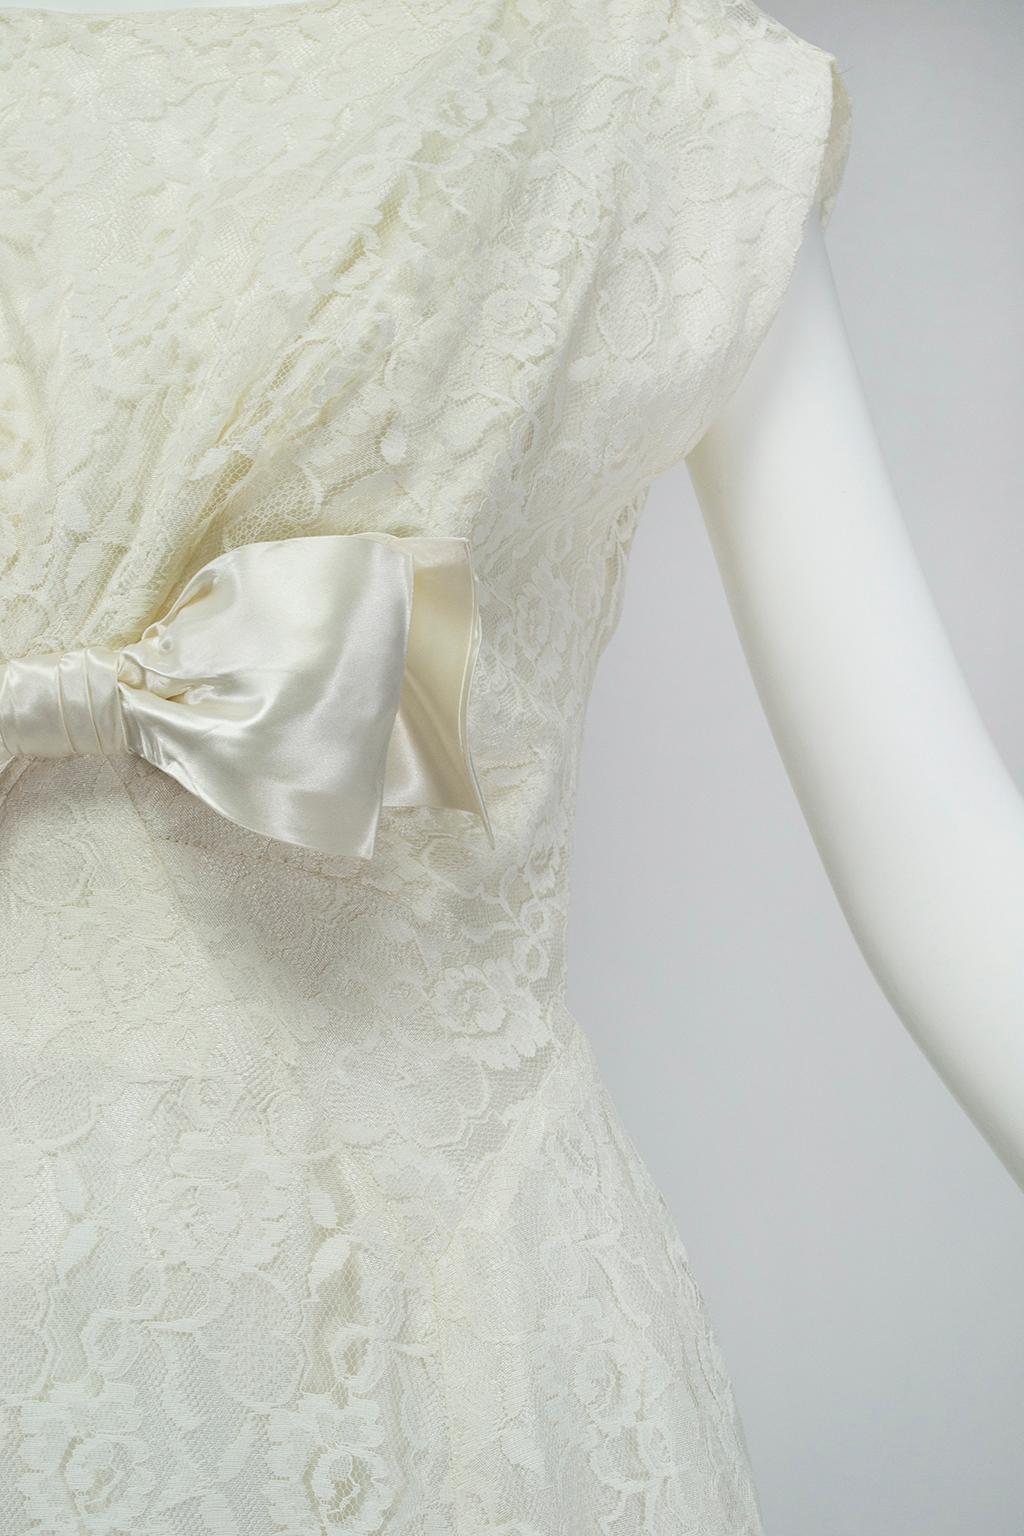 Emma Domb Ivory Floor Length Bateau Neck Wedding Gown with Empire Bow - S, 1950s In Good Condition For Sale In Tucson, AZ